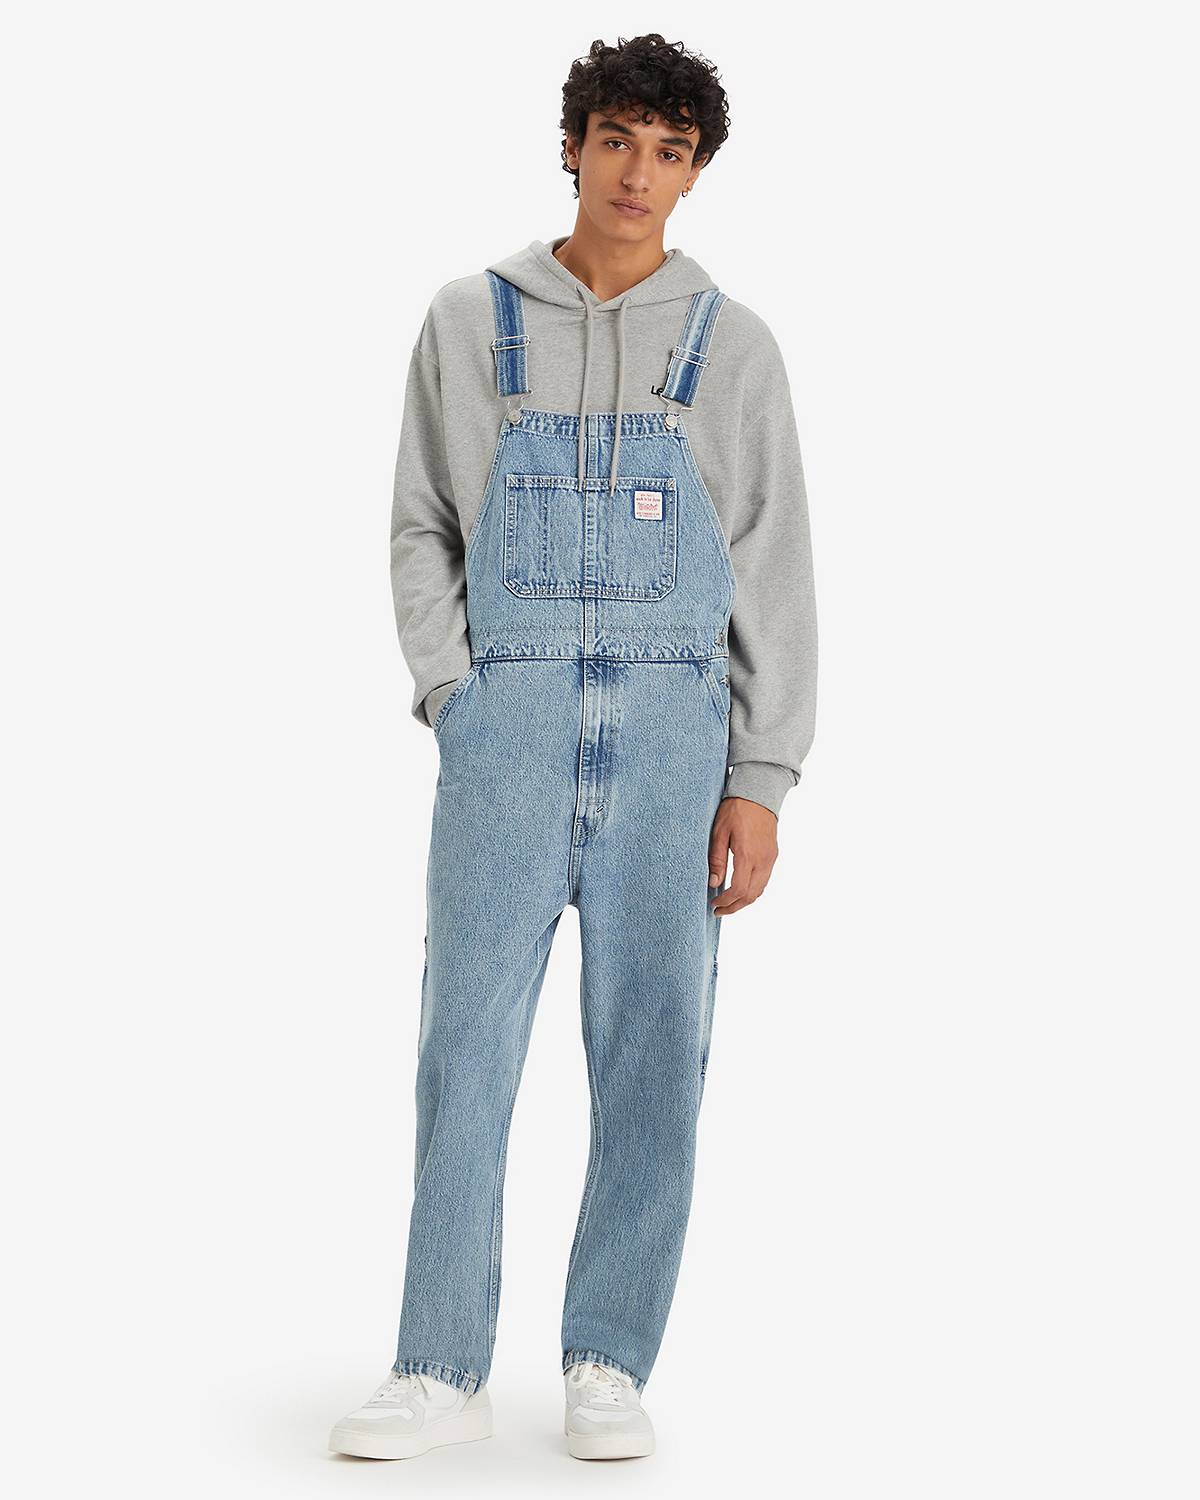 Male model wearing overalls.